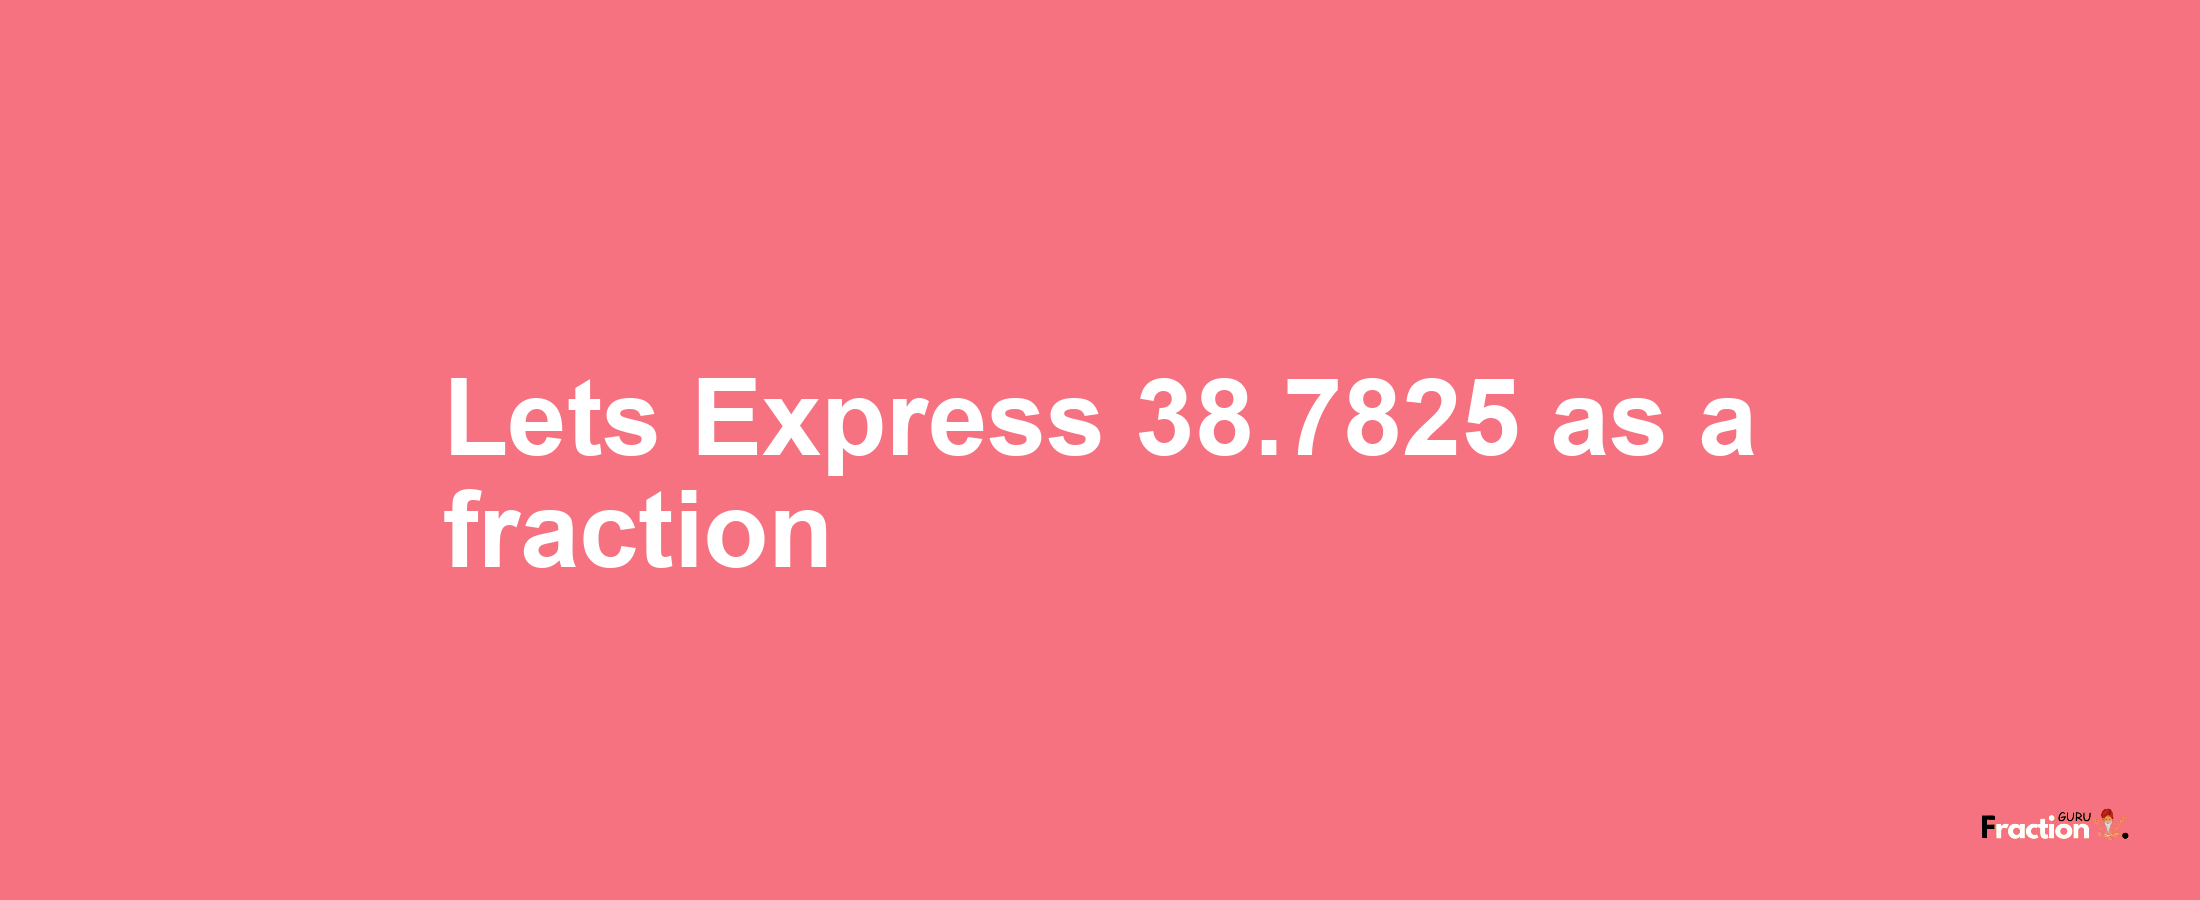 Lets Express 38.7825 as afraction